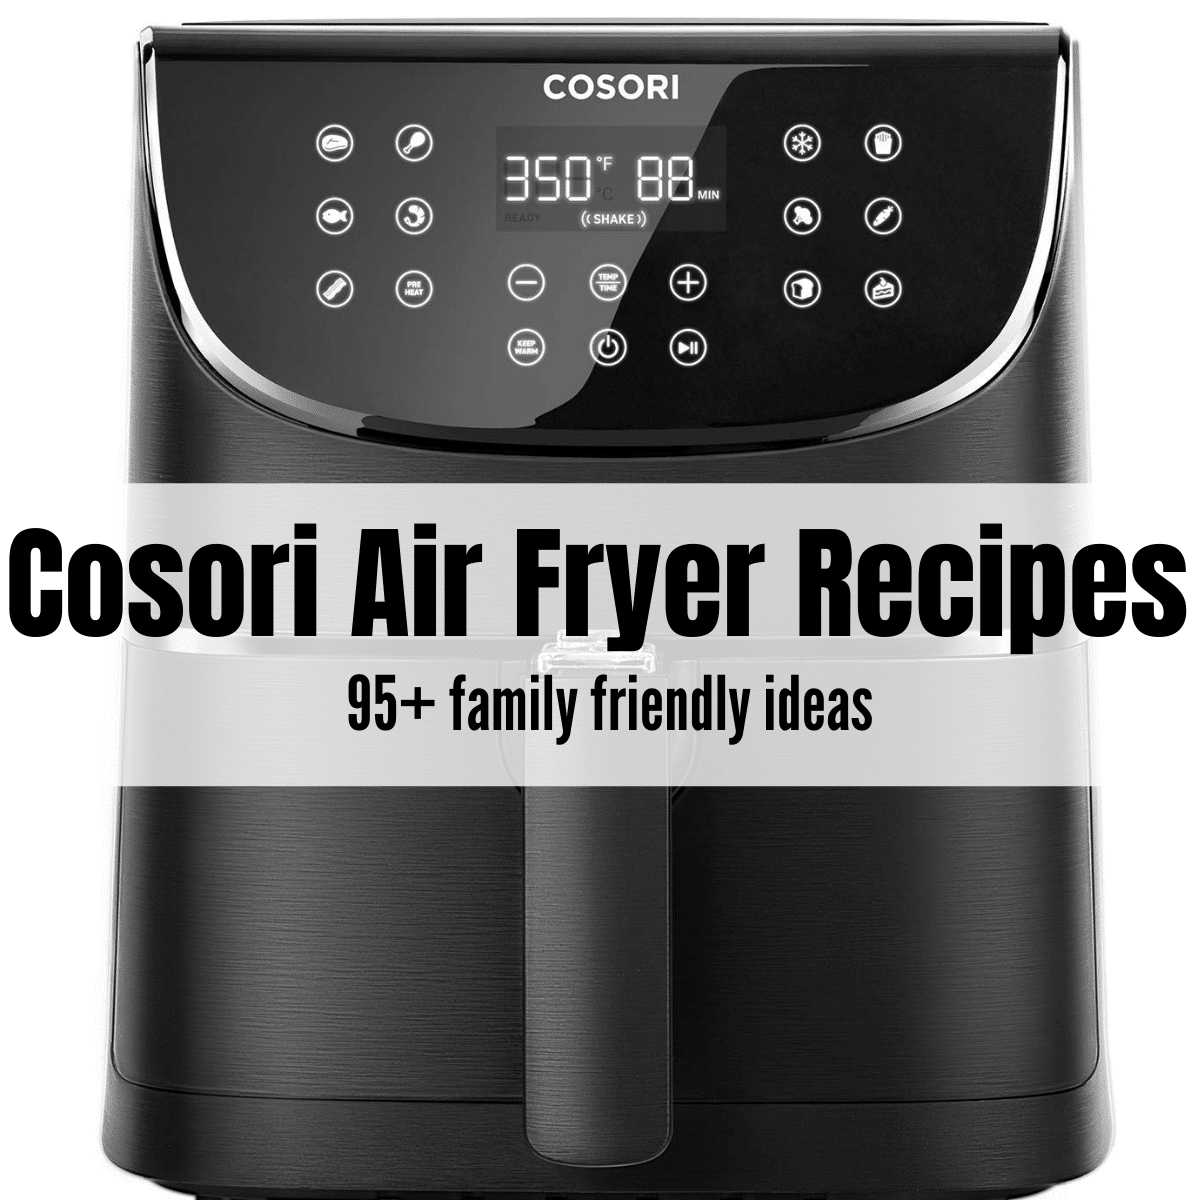 https://airfryereats.com/wp-content/uploads/2020/06/Cosori-air-fryer-recipes-feature-image.png